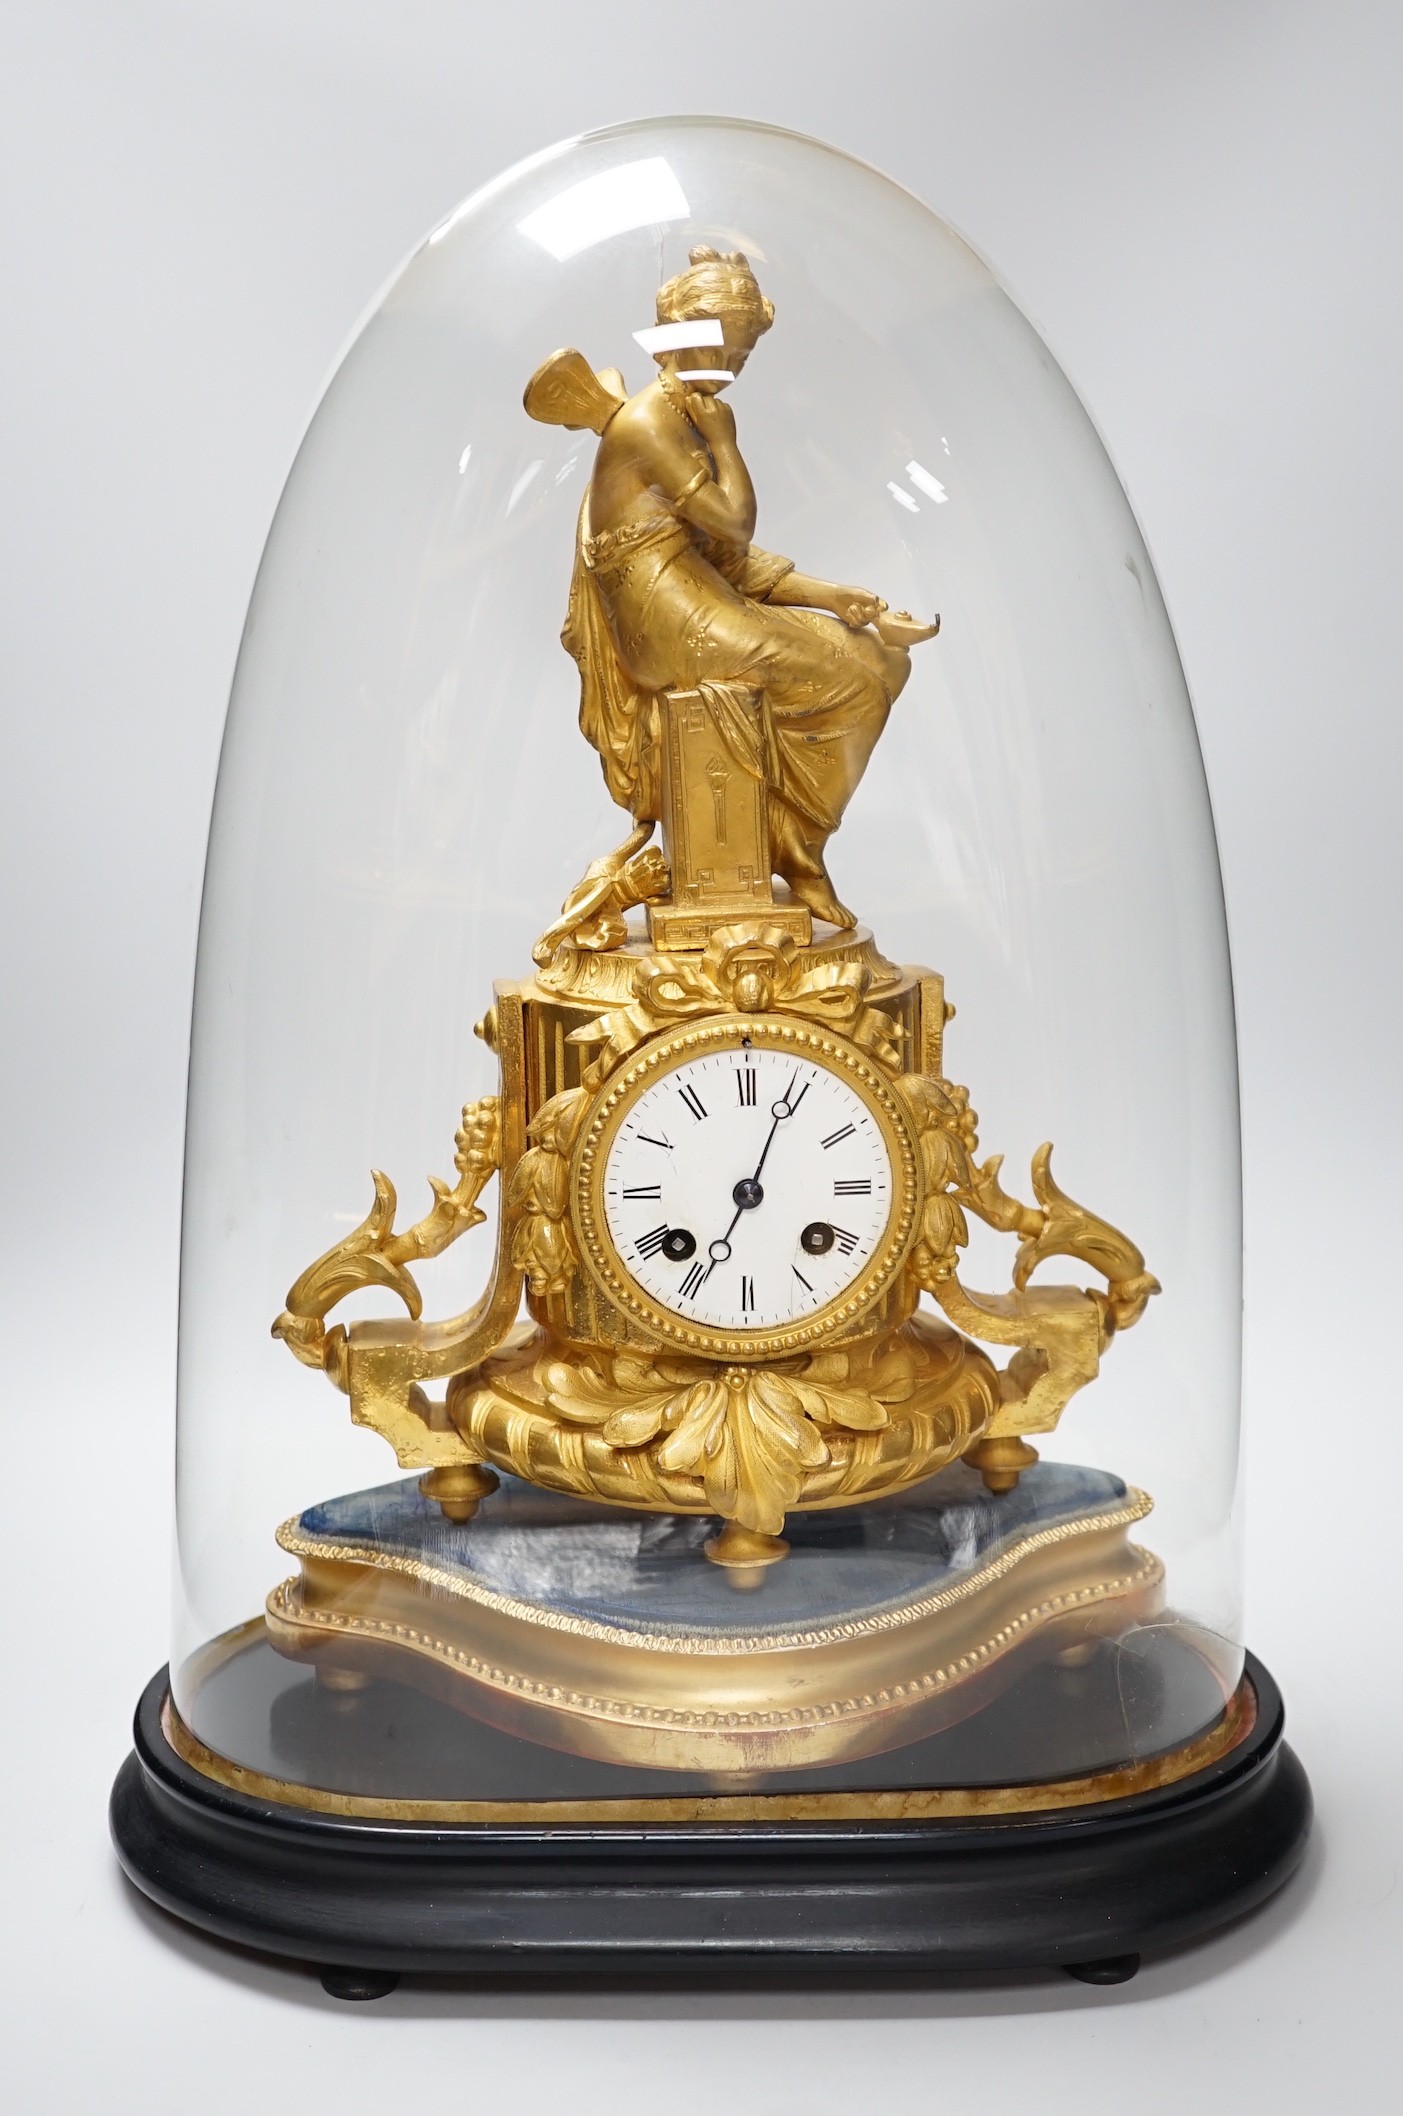 A French 19th century gilt metal clock by Phillipe H. Mourey on stand with glass dome, total